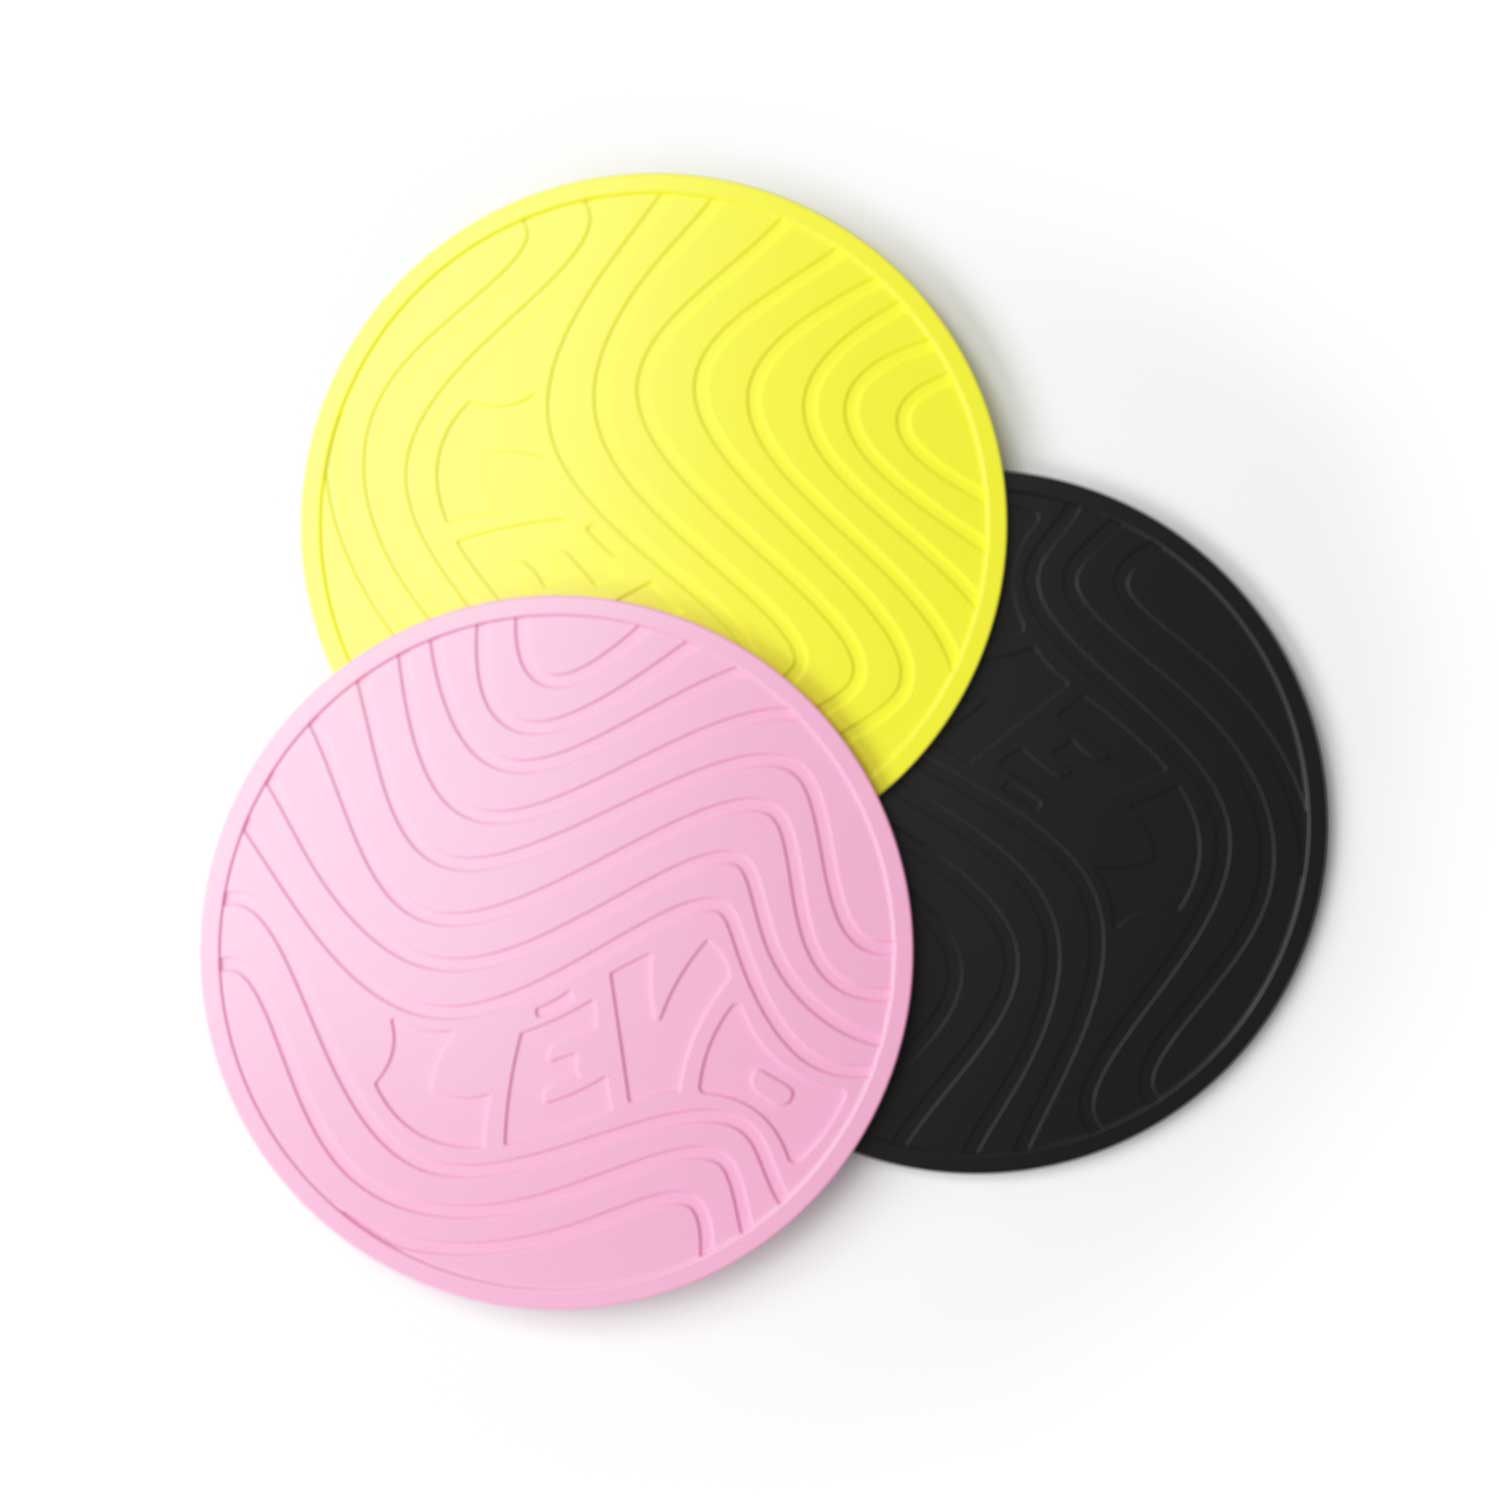 LEVO Silicone Trivets in yellow, pink, and black